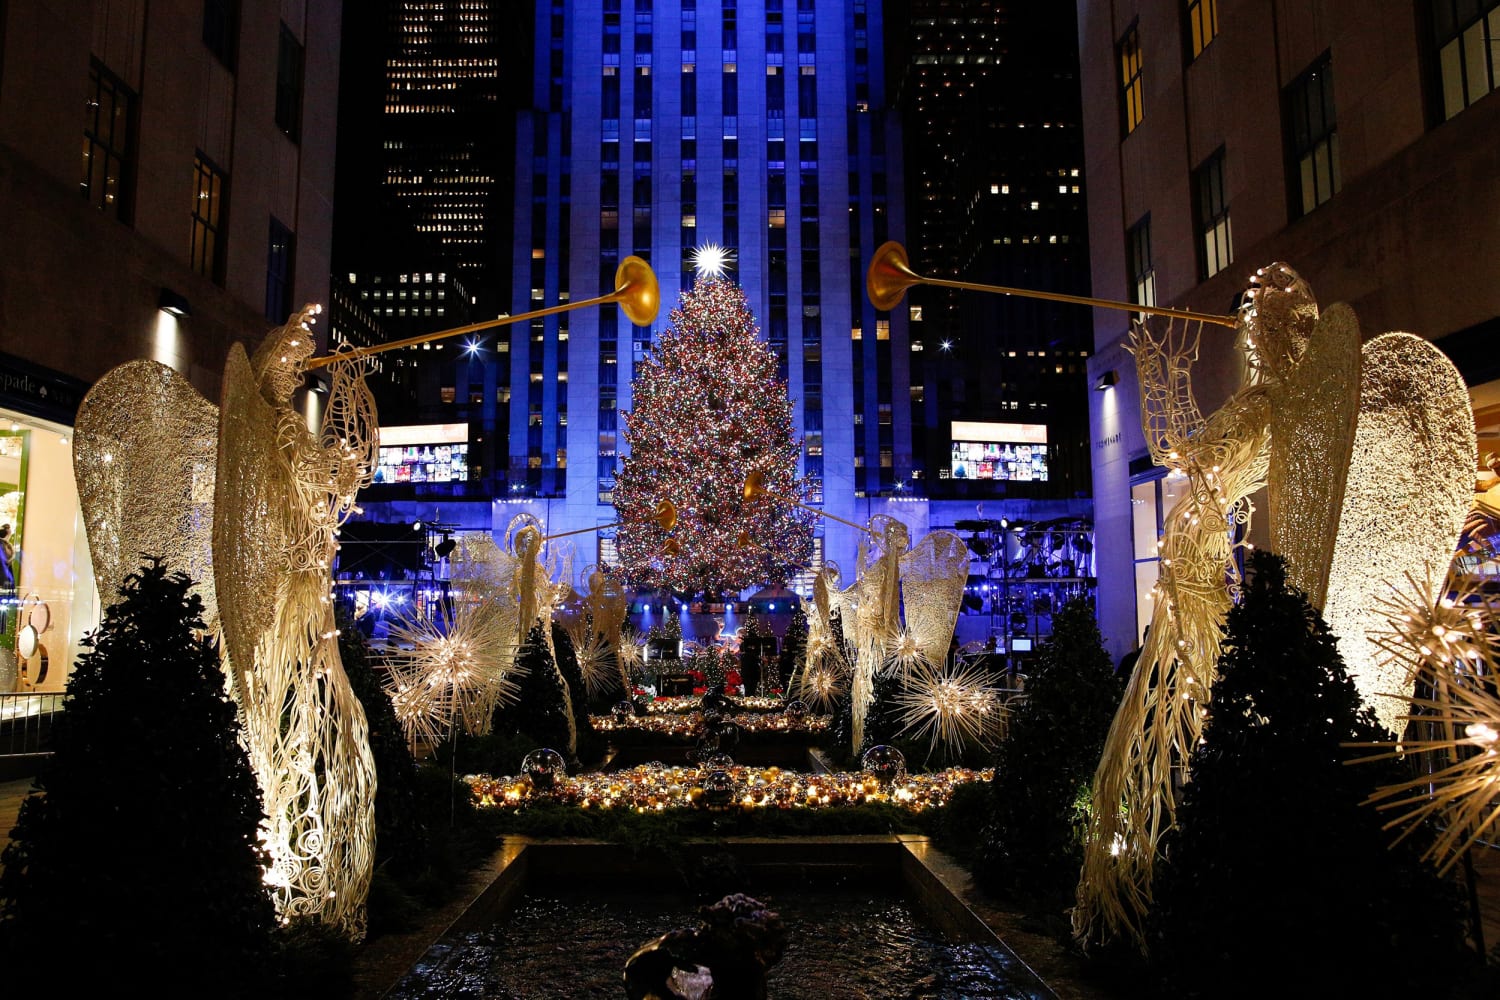 The Rockefeller Christmas Tree's journey from upstate to the plaza